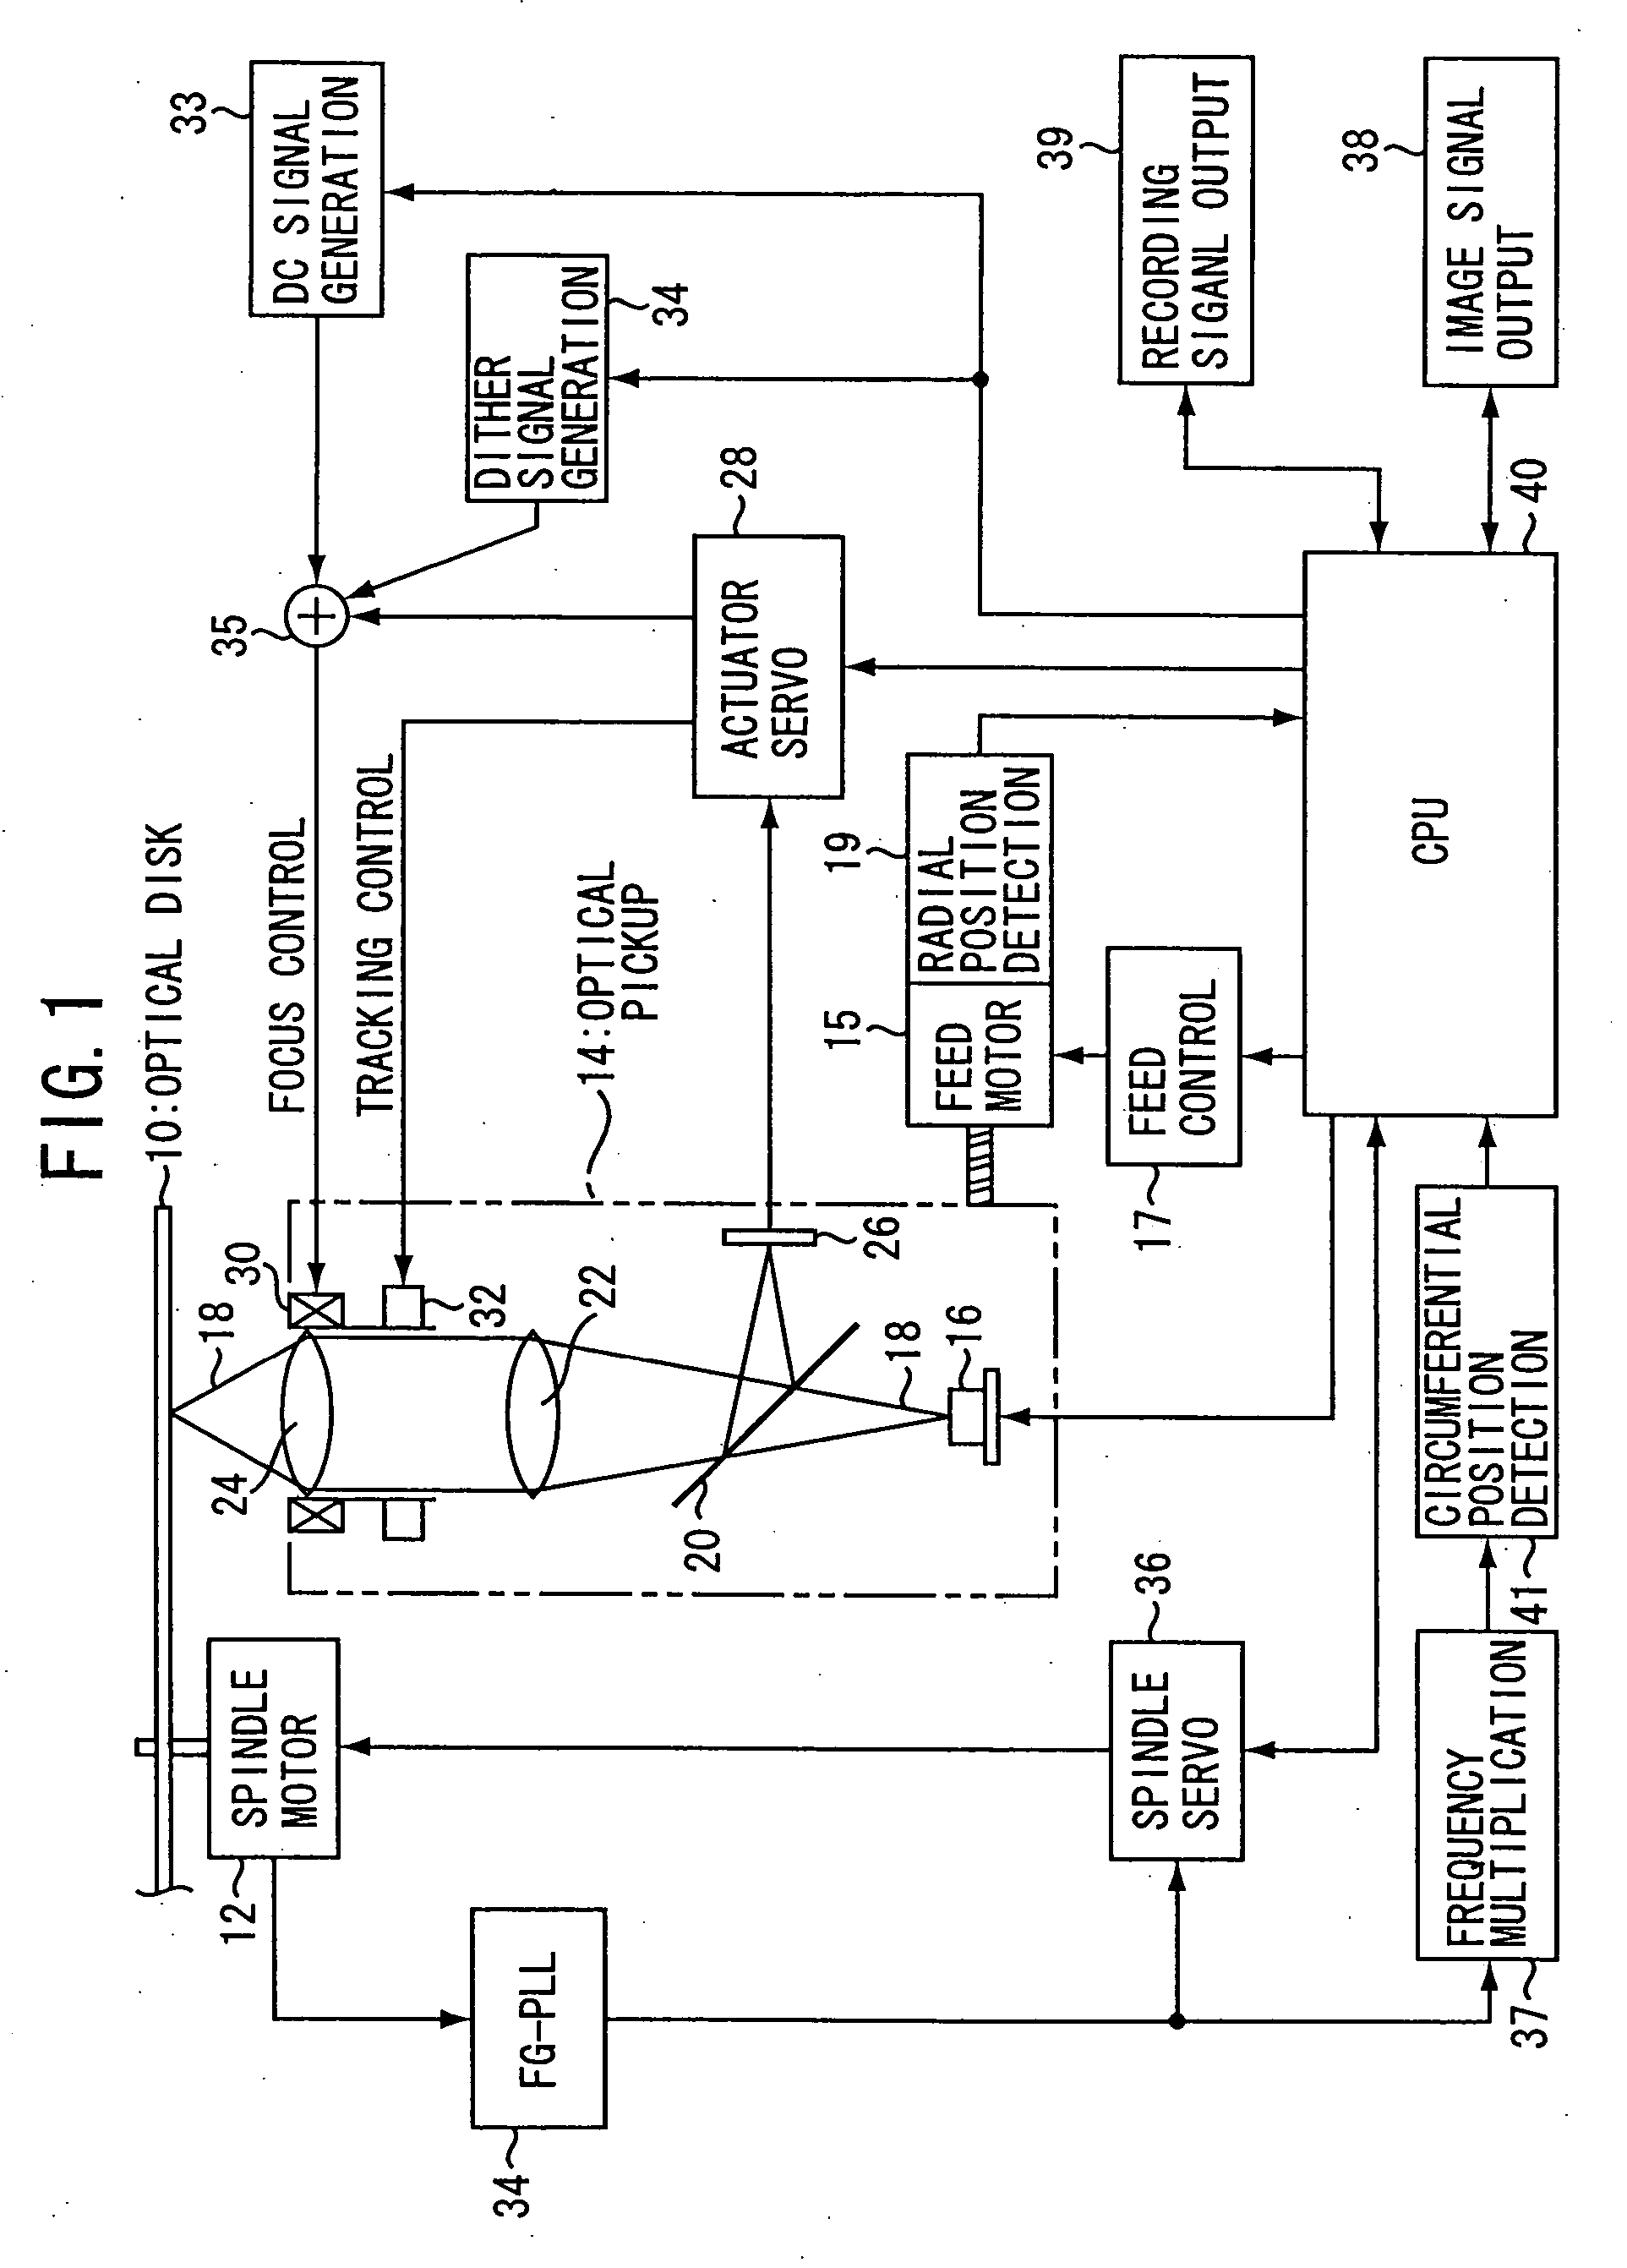 Method and apparatus for drawing visible image on optical disk by vibrating laser beam focus